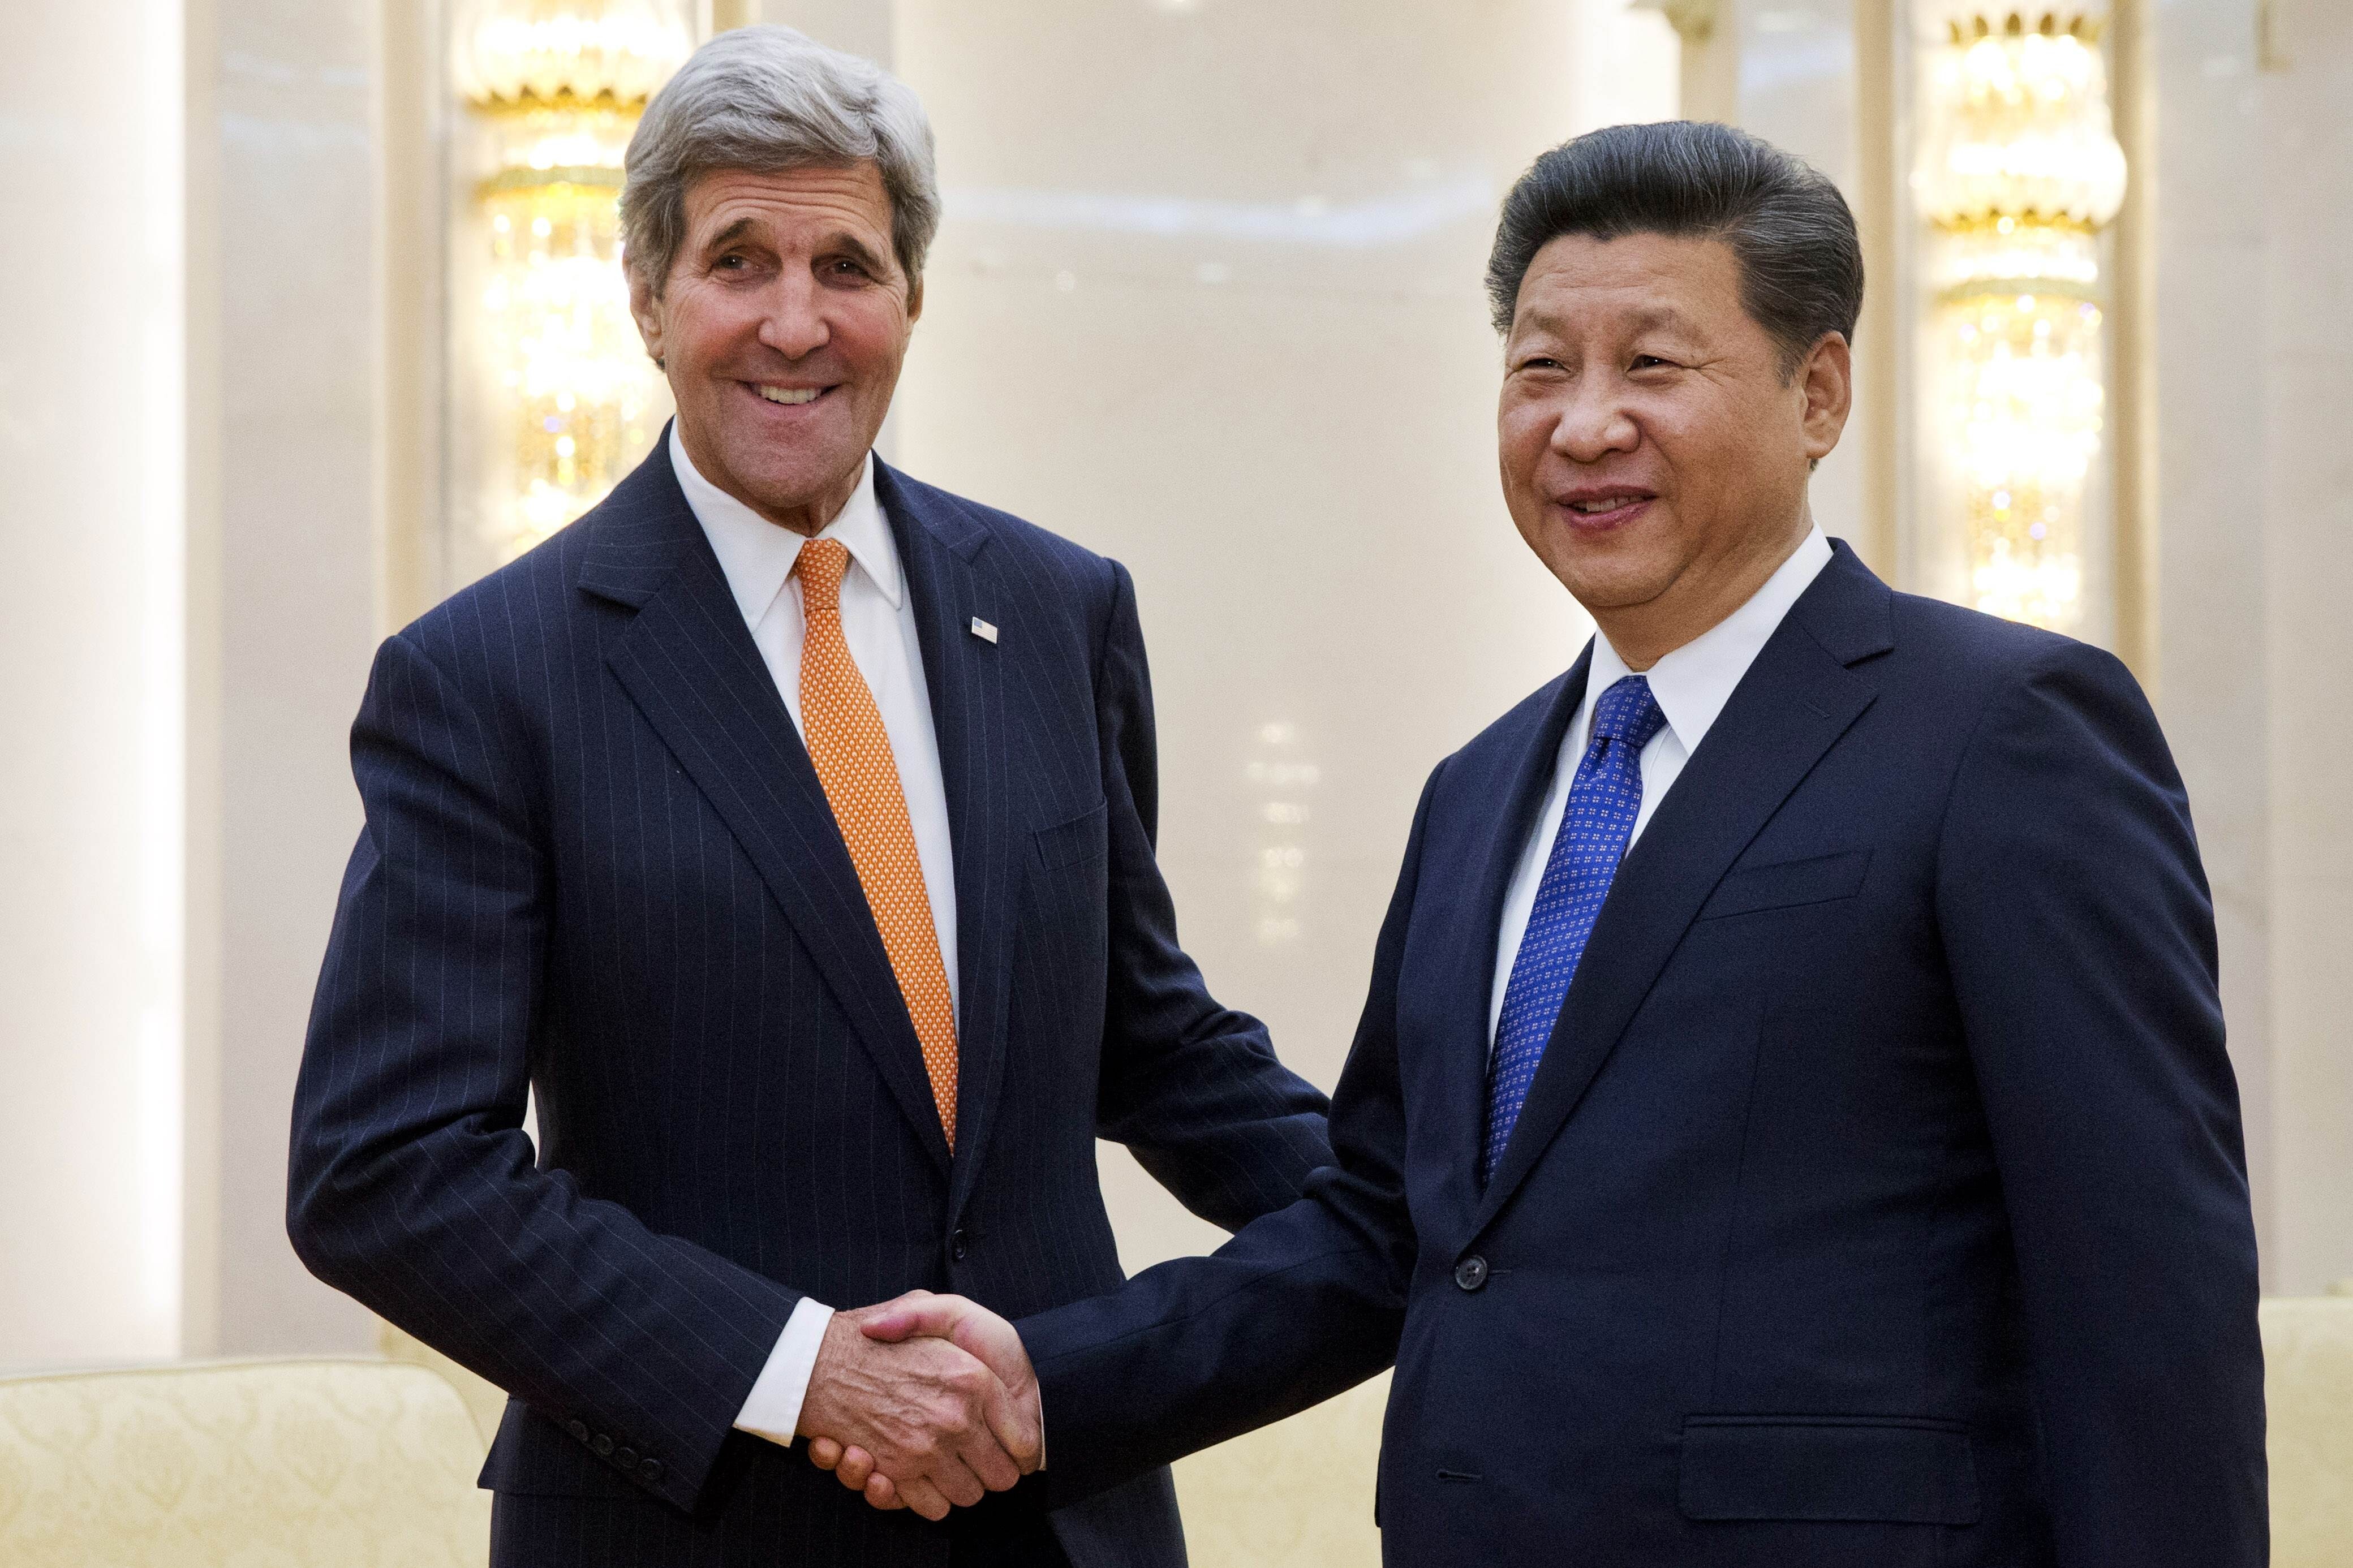 John Kerry, then serving as US secretary of state, meets Chinese President Xi Jinping in Beijing in 2016. Photo: AFP